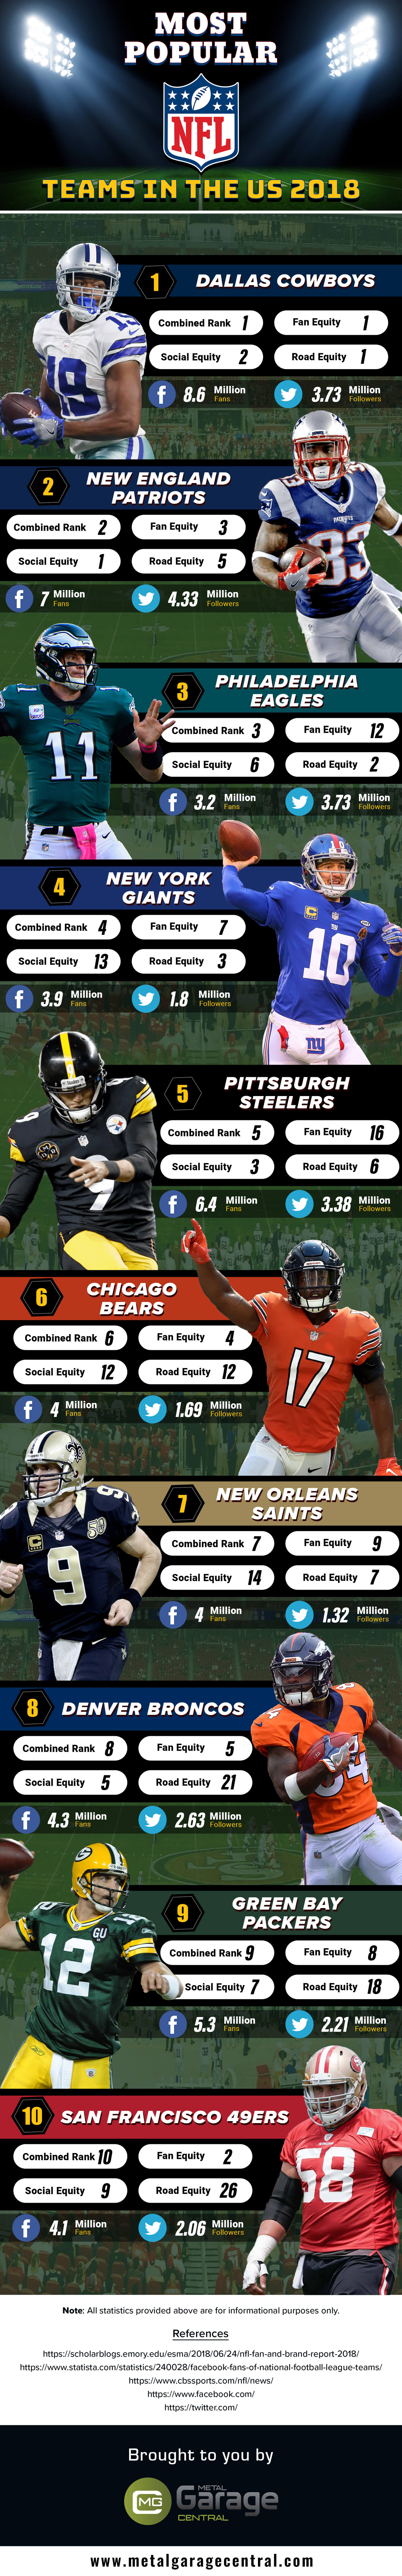 Most Popular NFL Teams in the US 2018